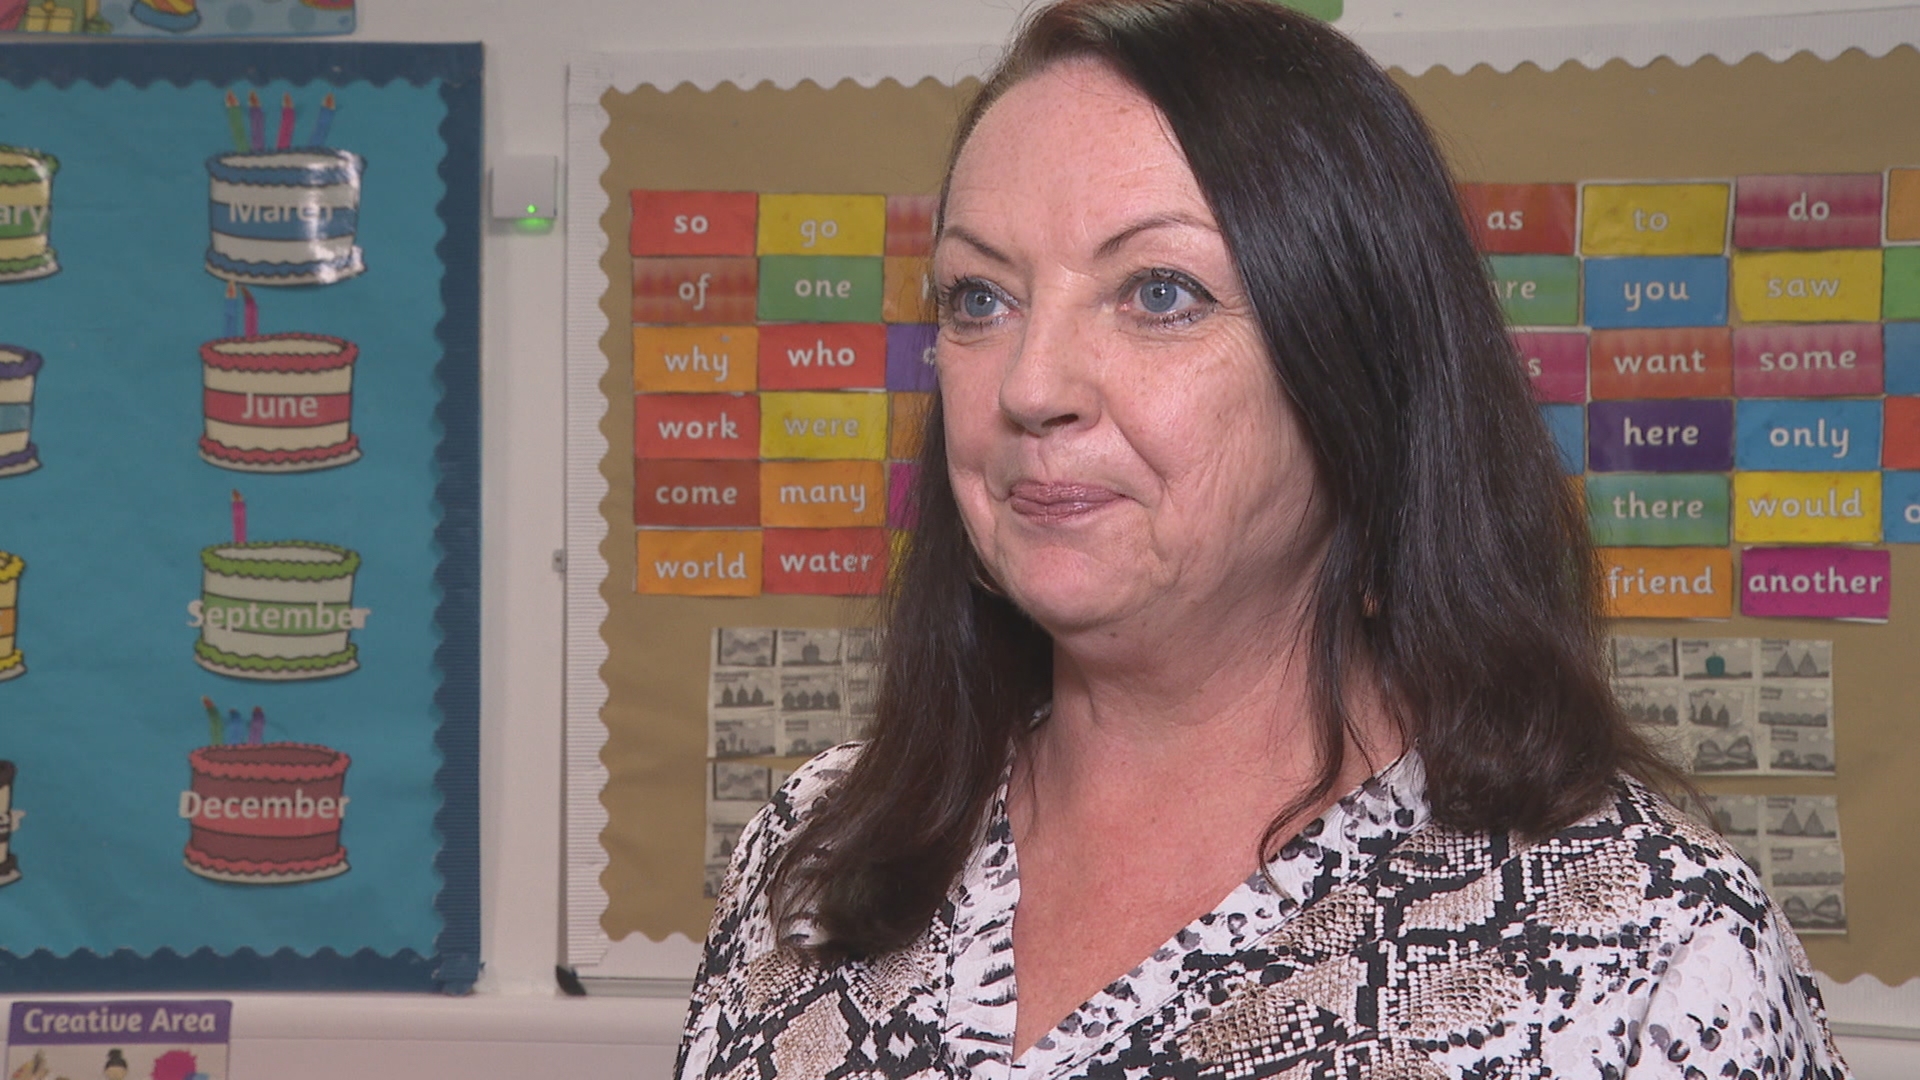 Clare Johnson said the children were 'really excited' about receiving the reply. 